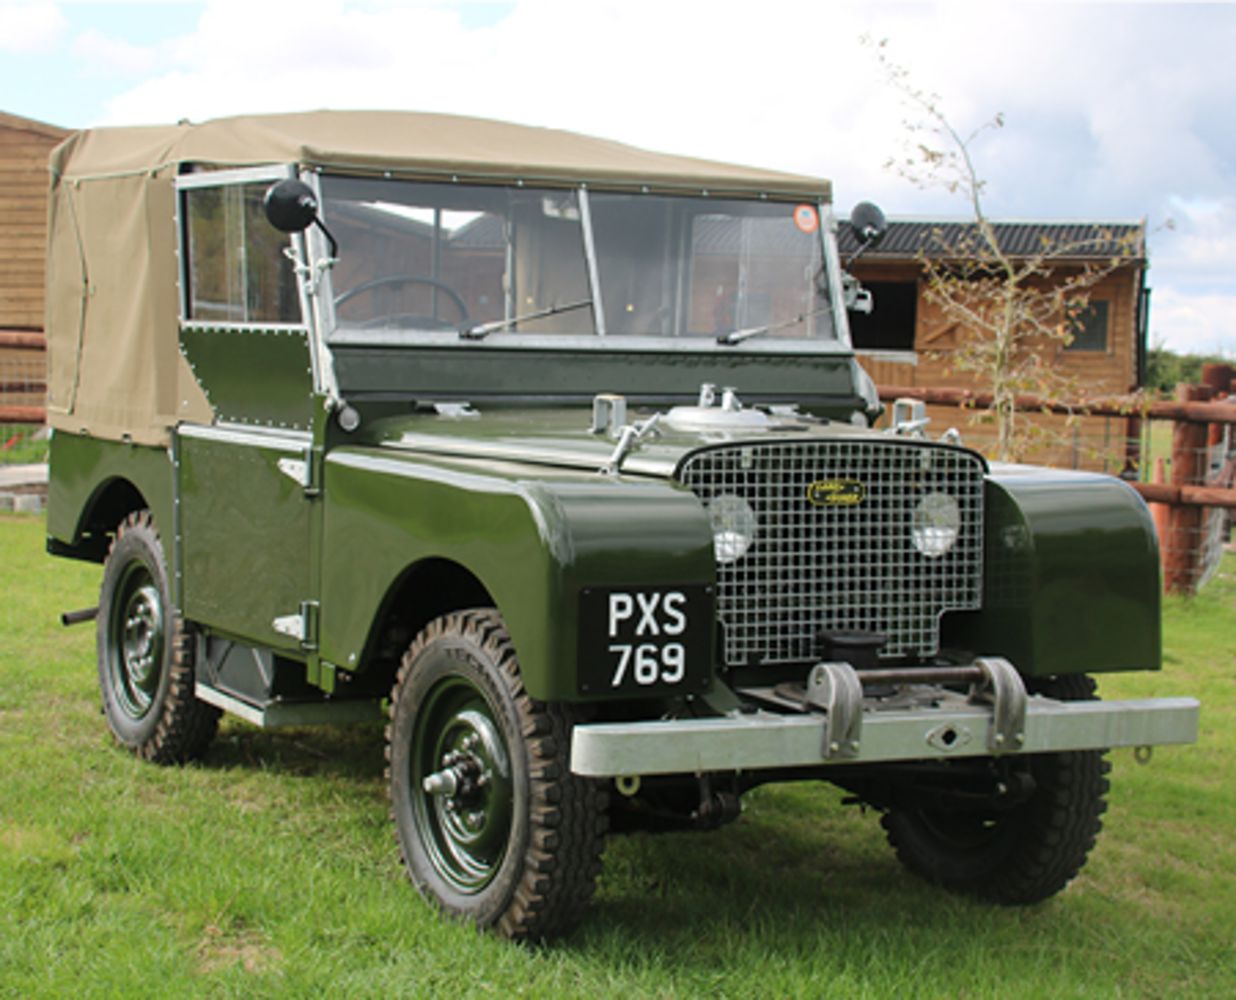 Icons of Motoring - A Land Rover Auction